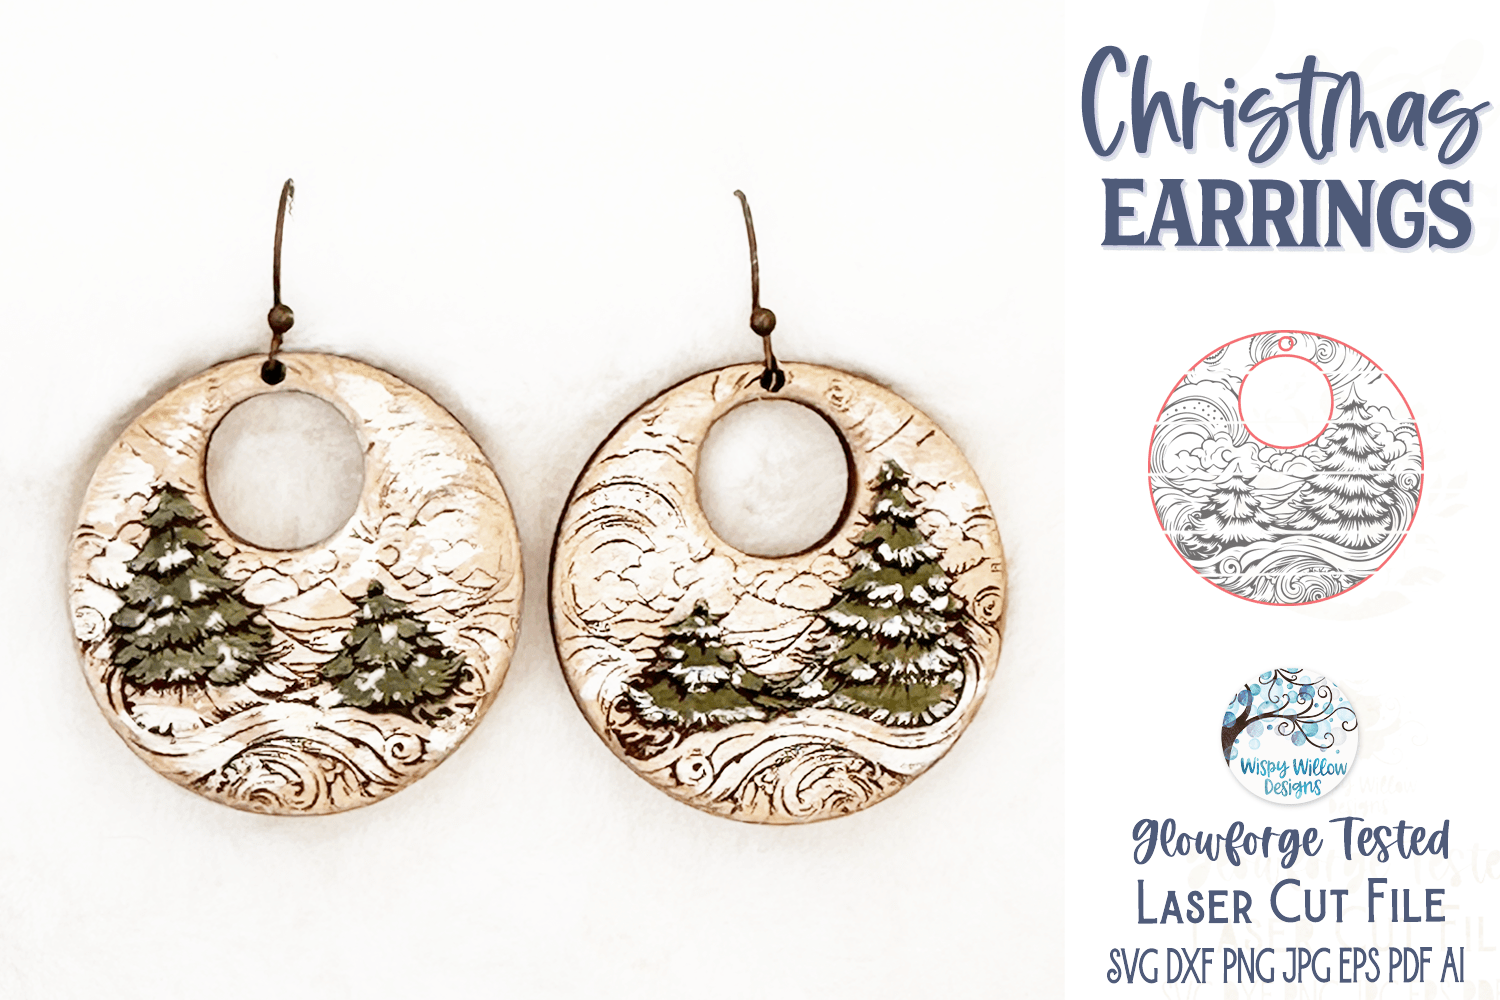 Christmas Earring SVG for Glowforge Laser Wispy Willow Designs Company